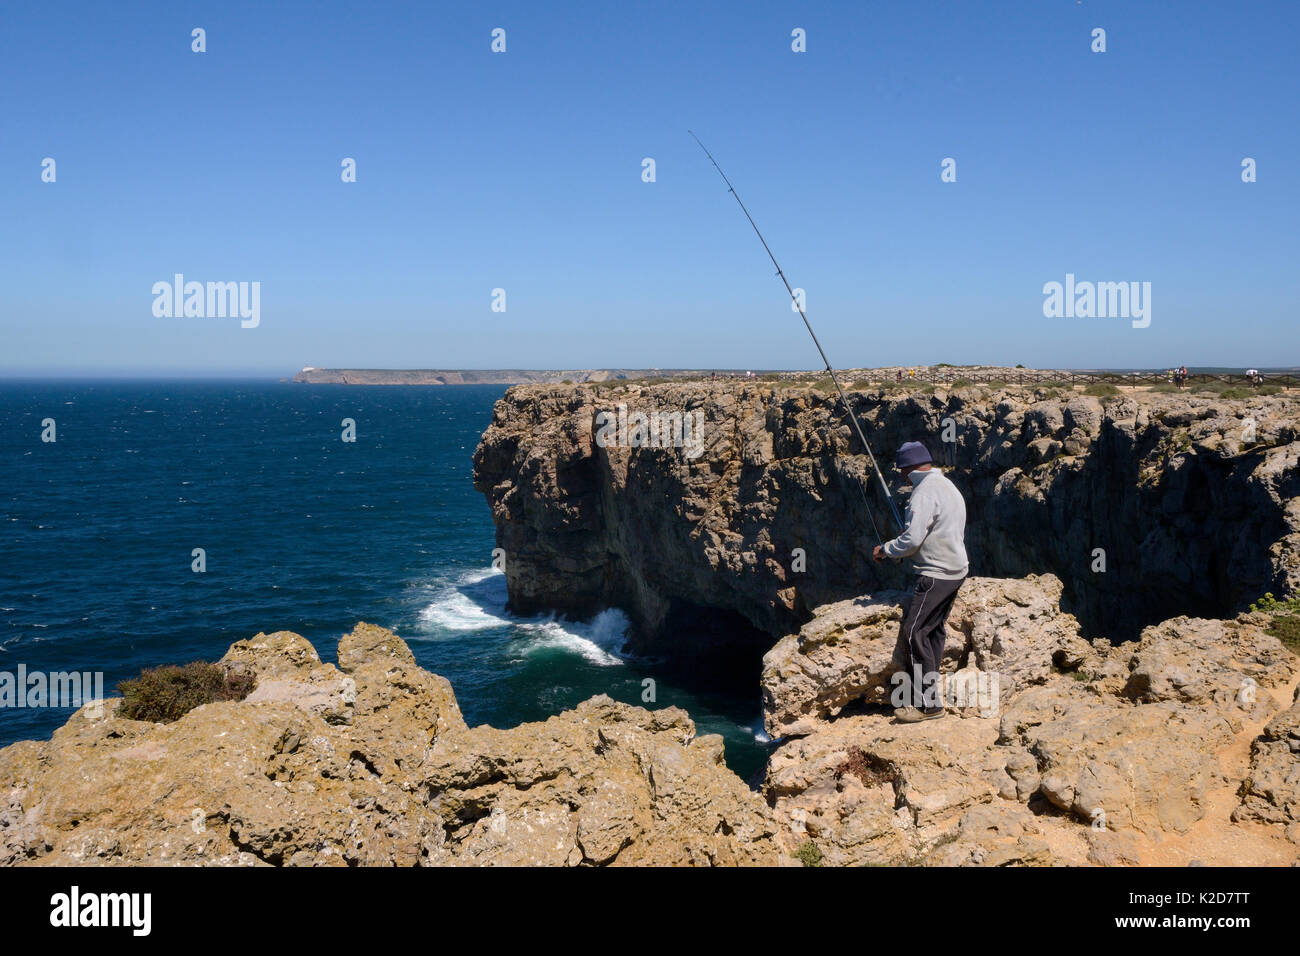 Fisherman angling in the Atlantic sea from high cliffs at Ponta de Sagres, Algarve, Portugal, July 2013. Stock Photo